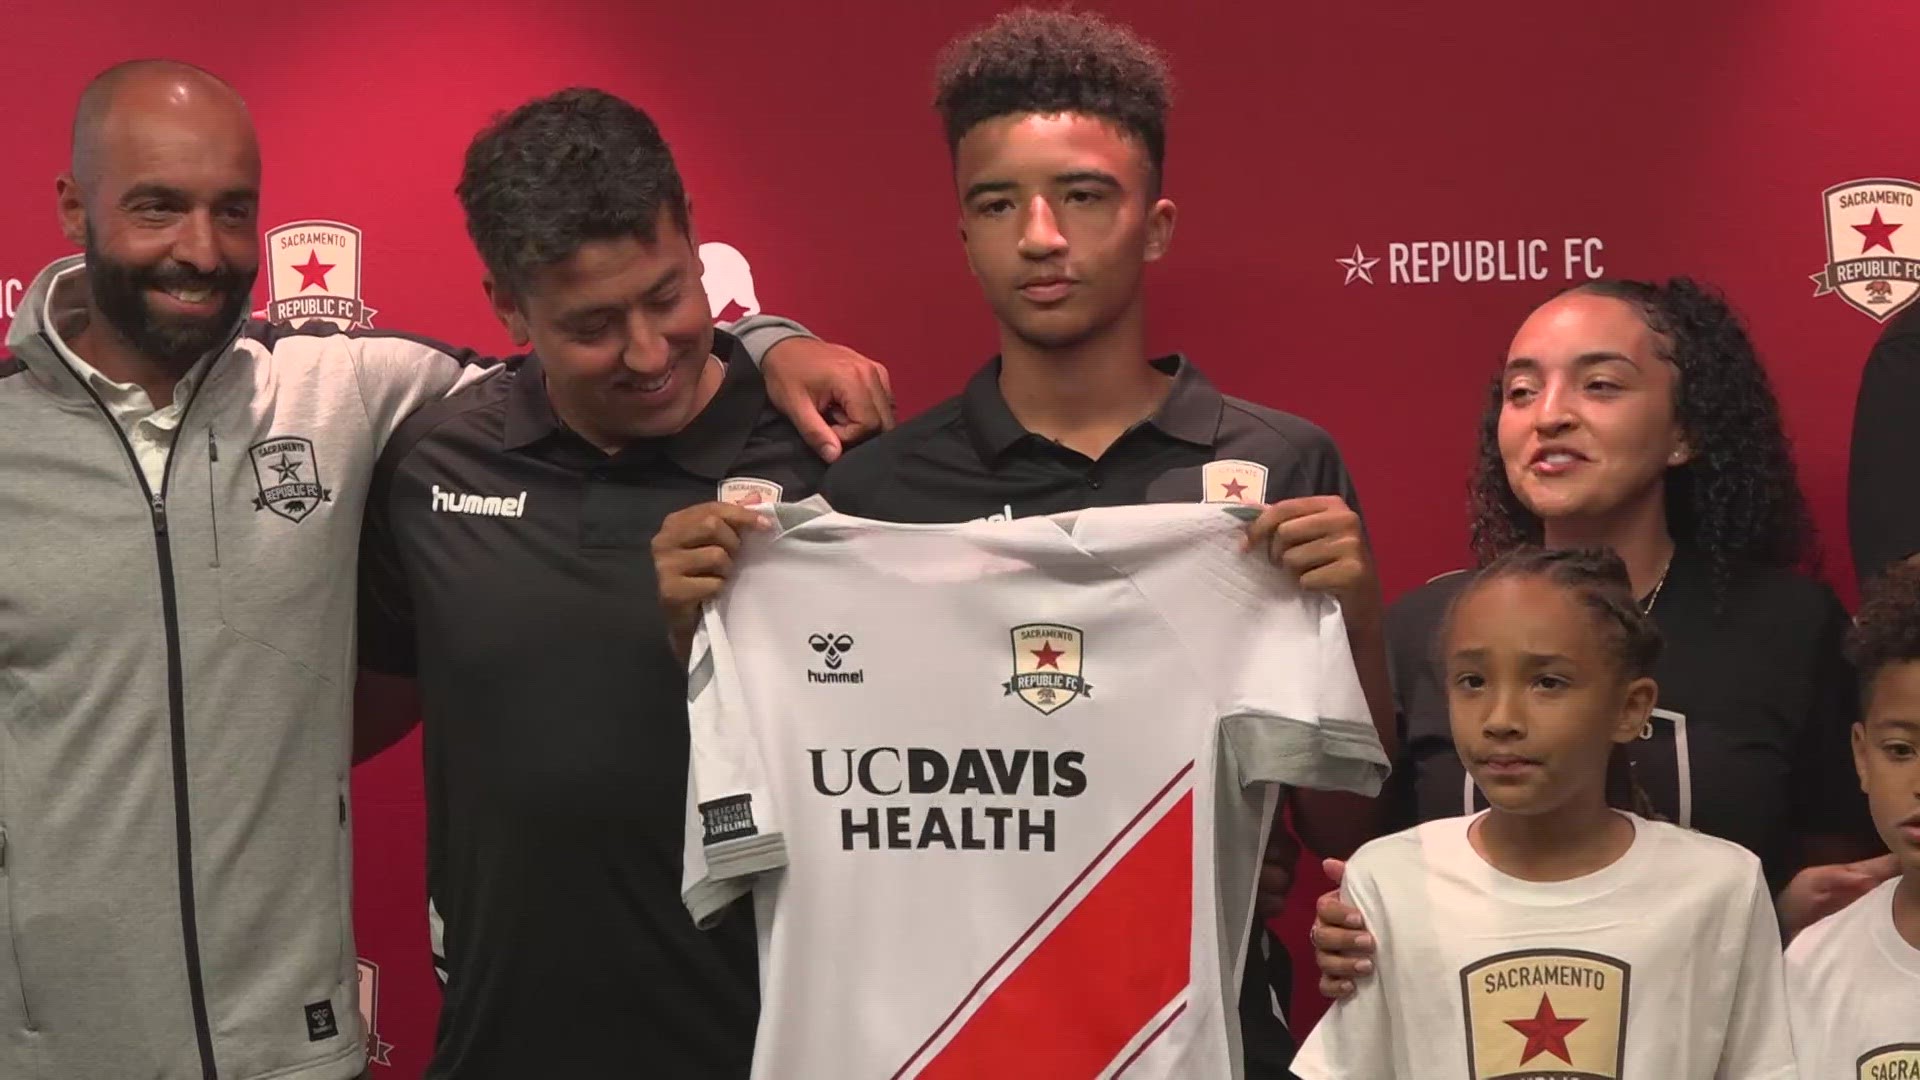 Da'vian Kimbrough was part of the club's youth development academy. He just signed his first professional contract.